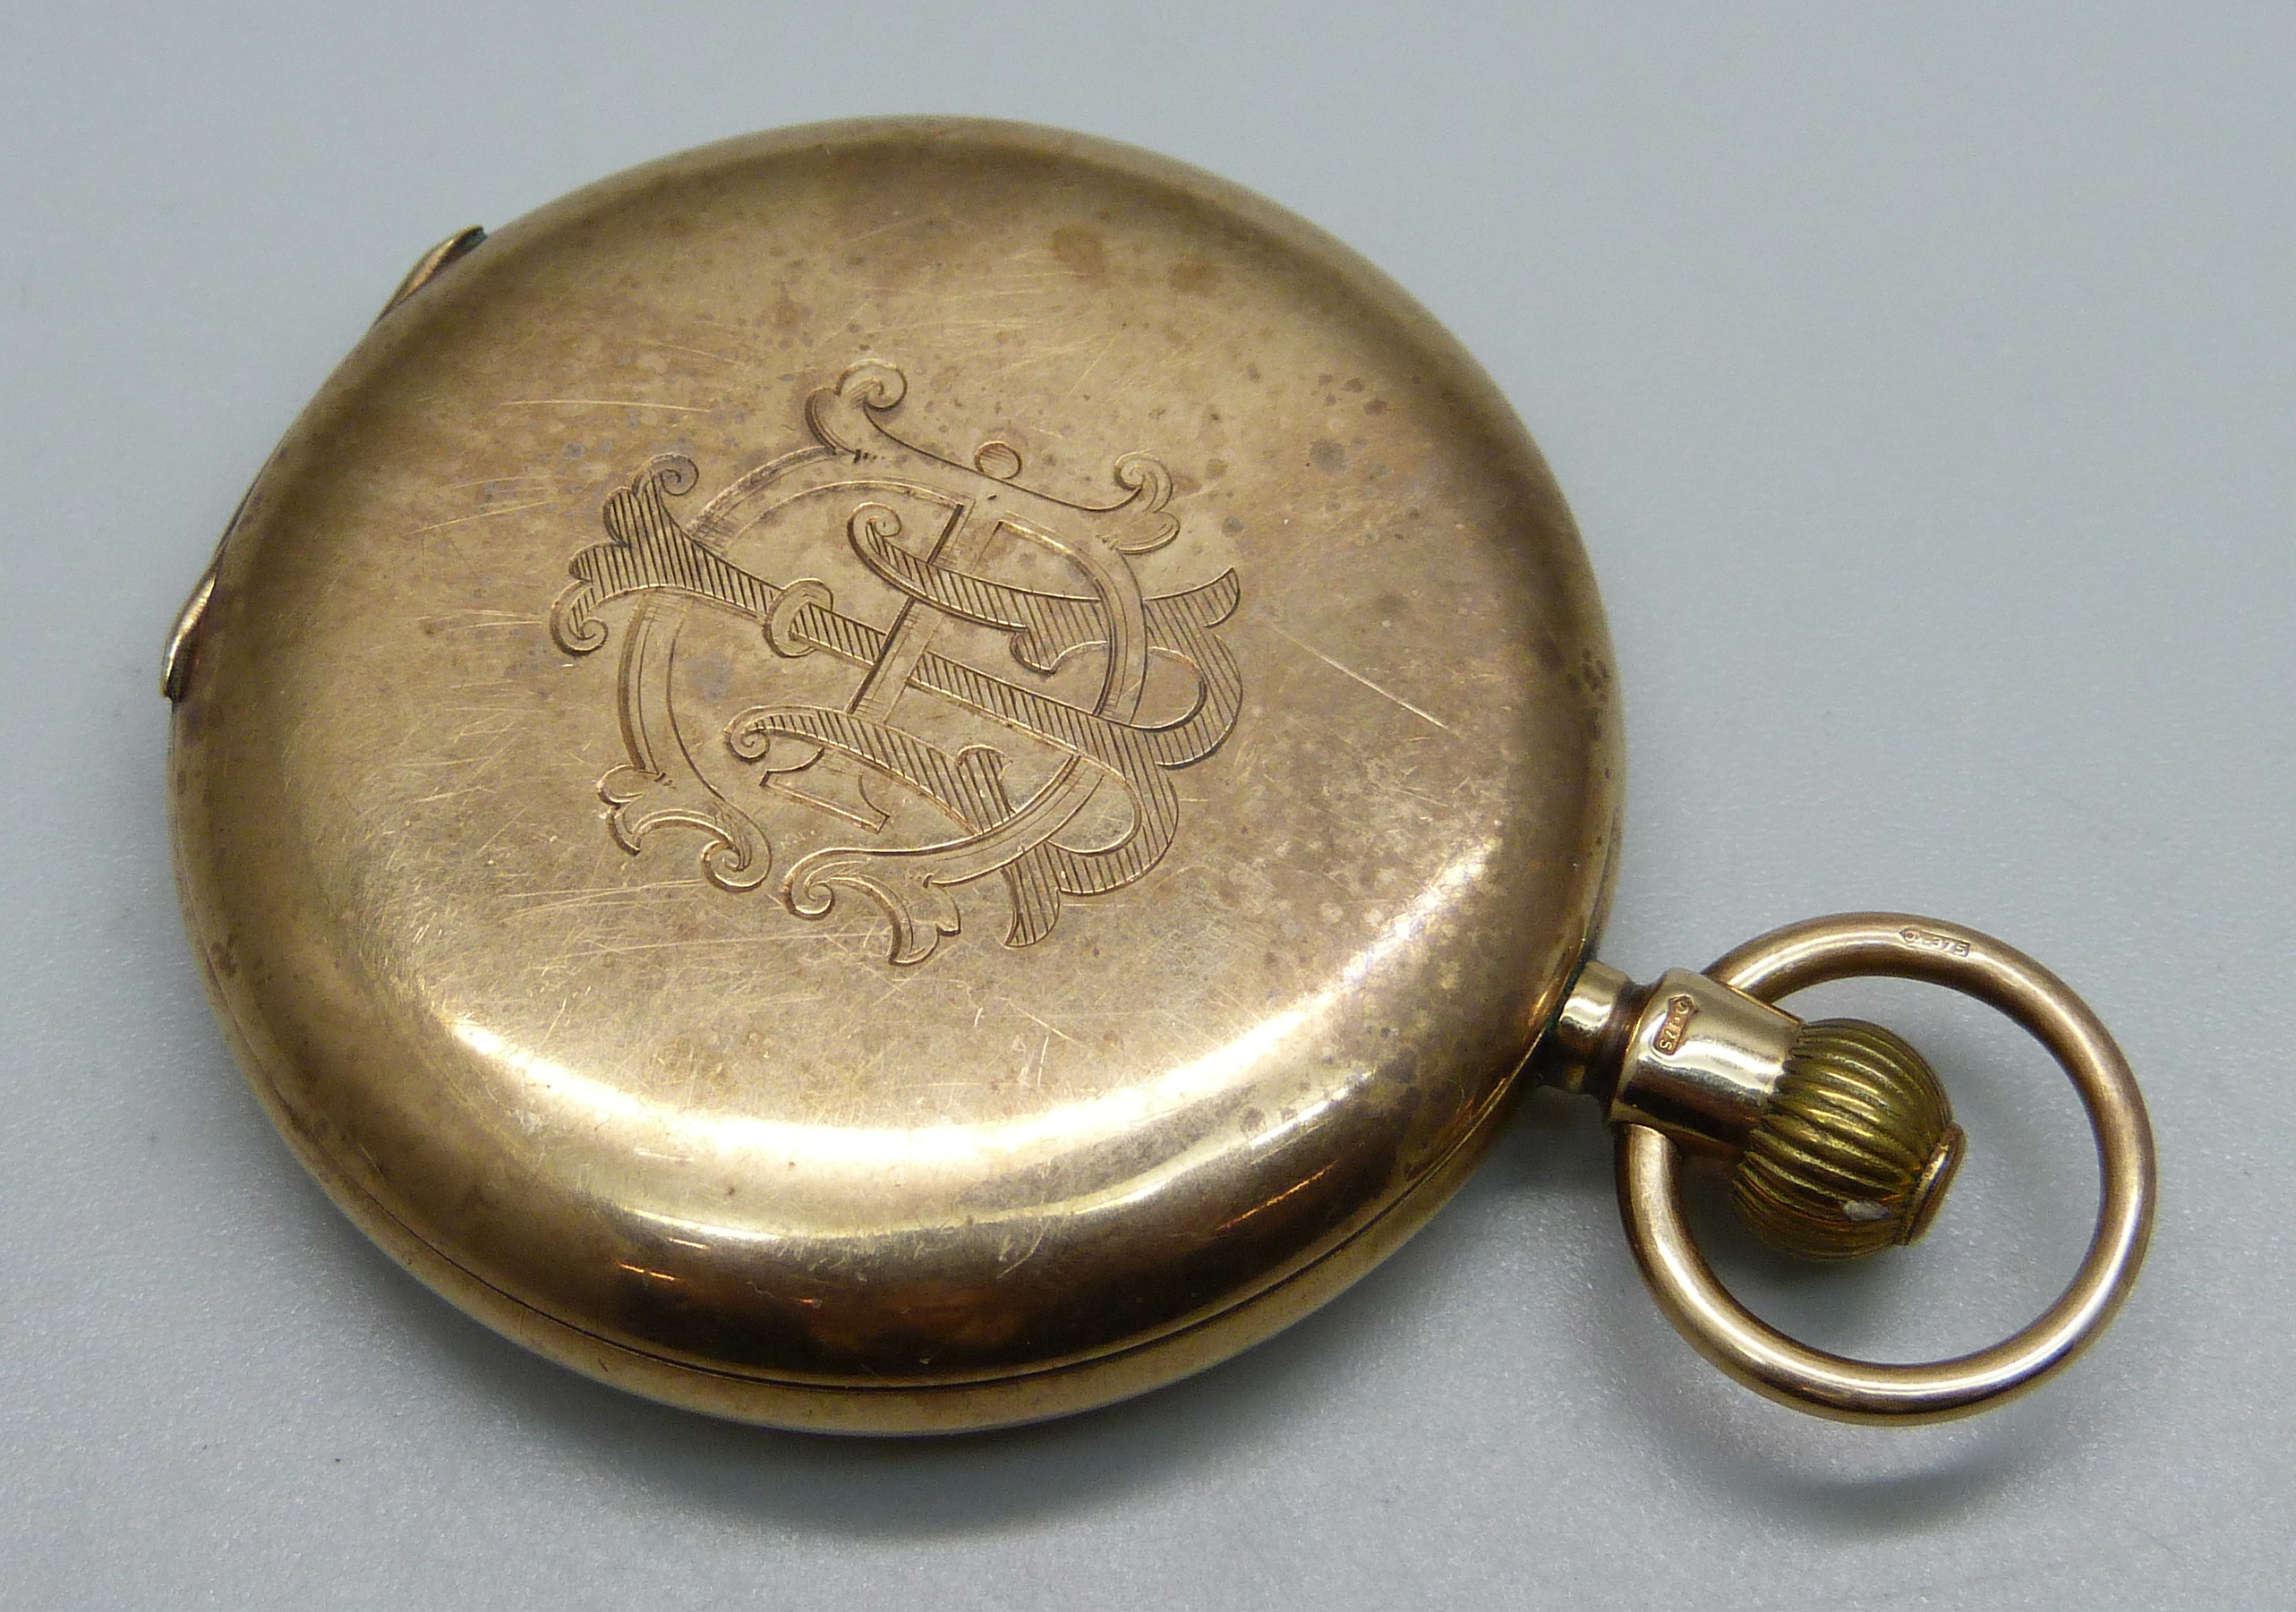 A 9ct gold full-hunter pocket watch, inner case 9ct gold, bears inscription dated 1928 and monogram, - Image 3 of 8